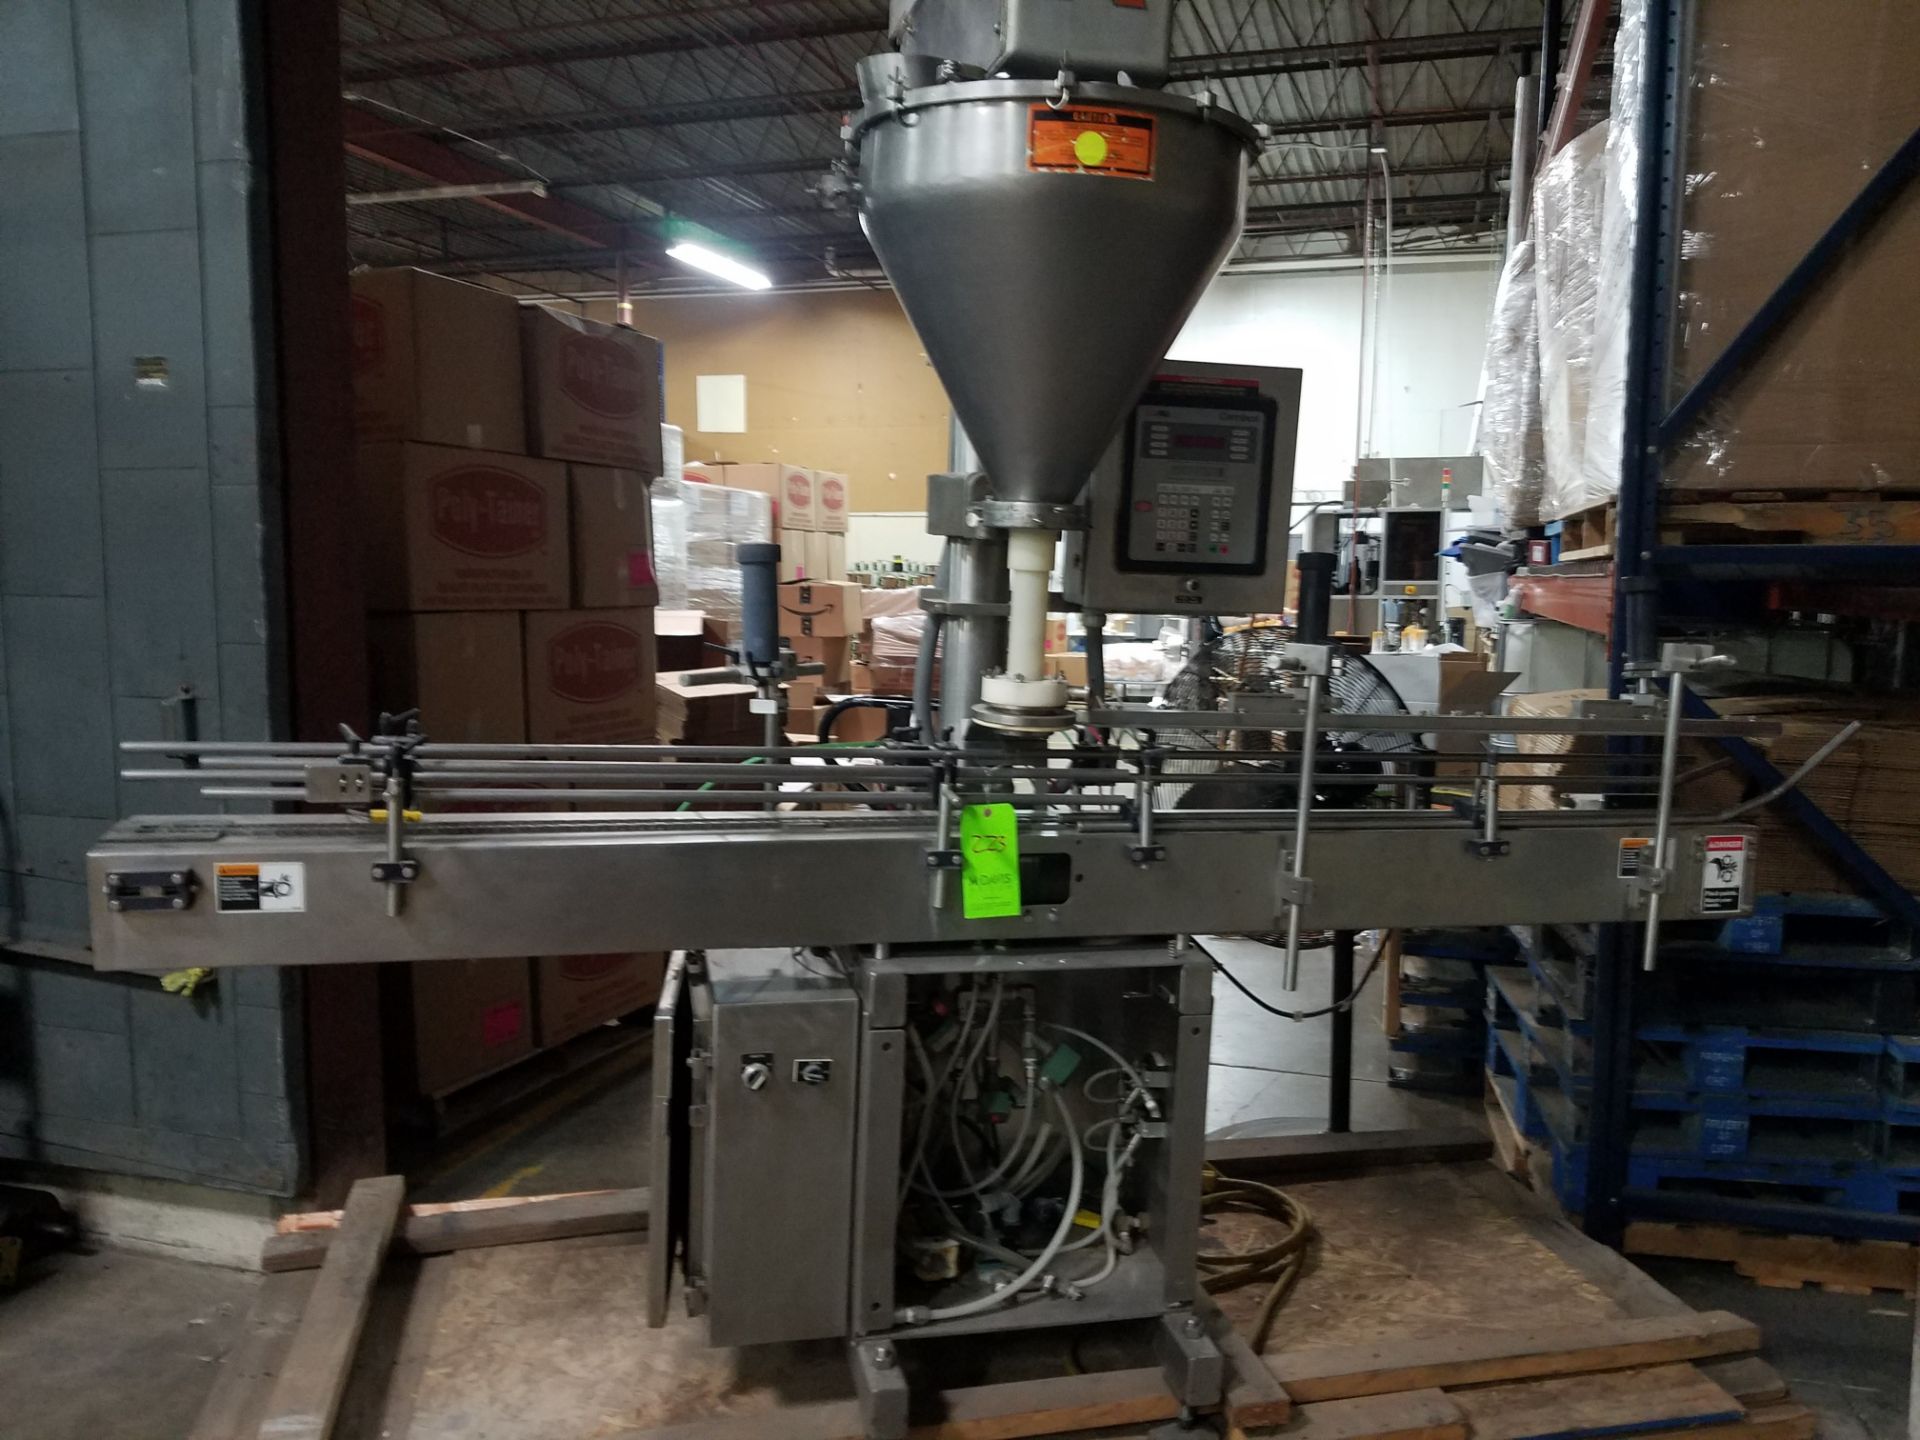 All Fill Automatic Powder Filler, Model SHAA-400, S/N 3042, Volt 480, 3 Phase (Rigging, Loading &